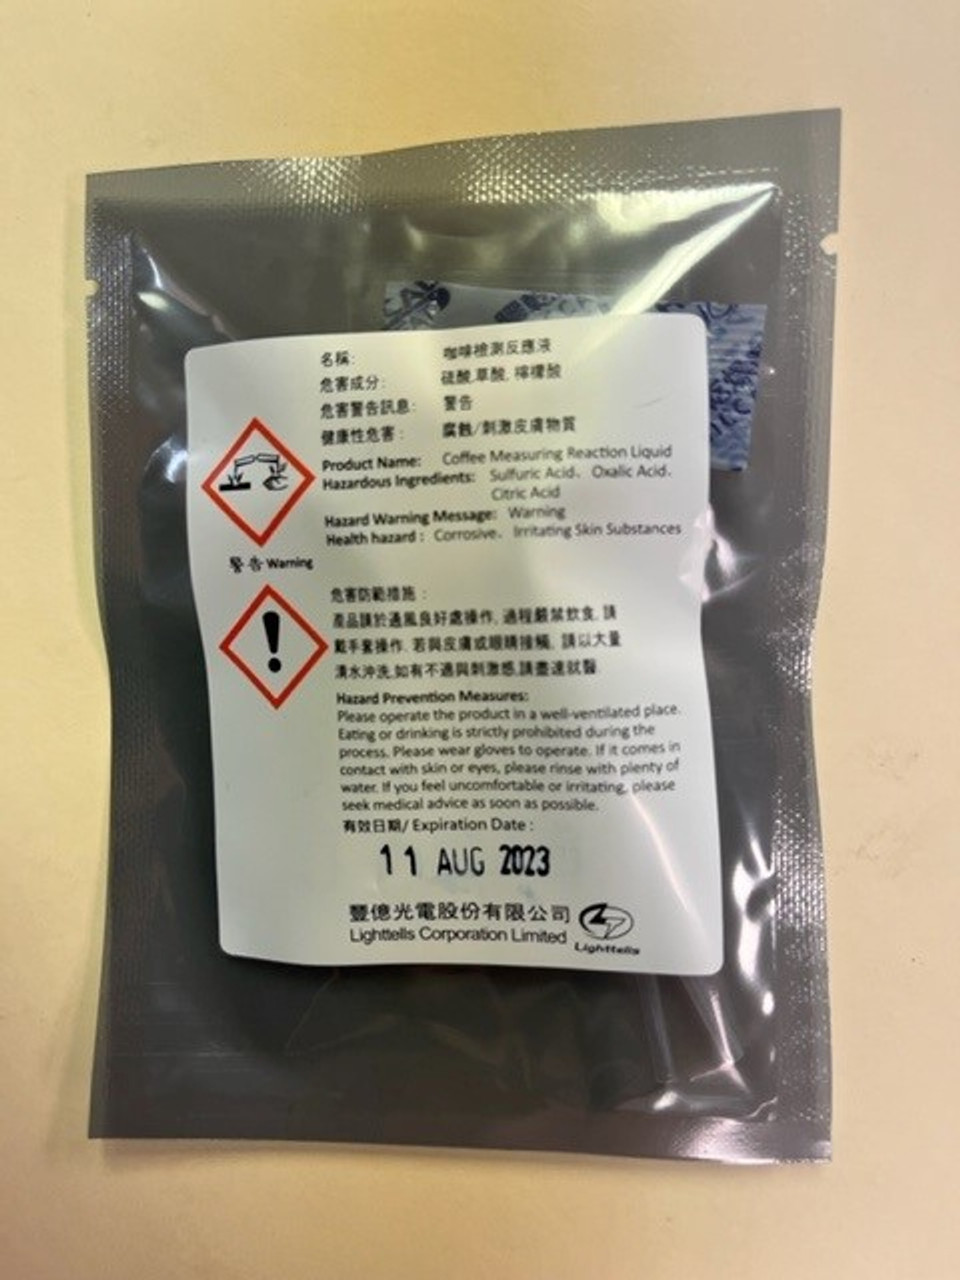 Pack 50 Premixed Chemical reagents
for use with CA-700 Caffeine Analyzer
One per test
One year expiration date from date of manufacture.